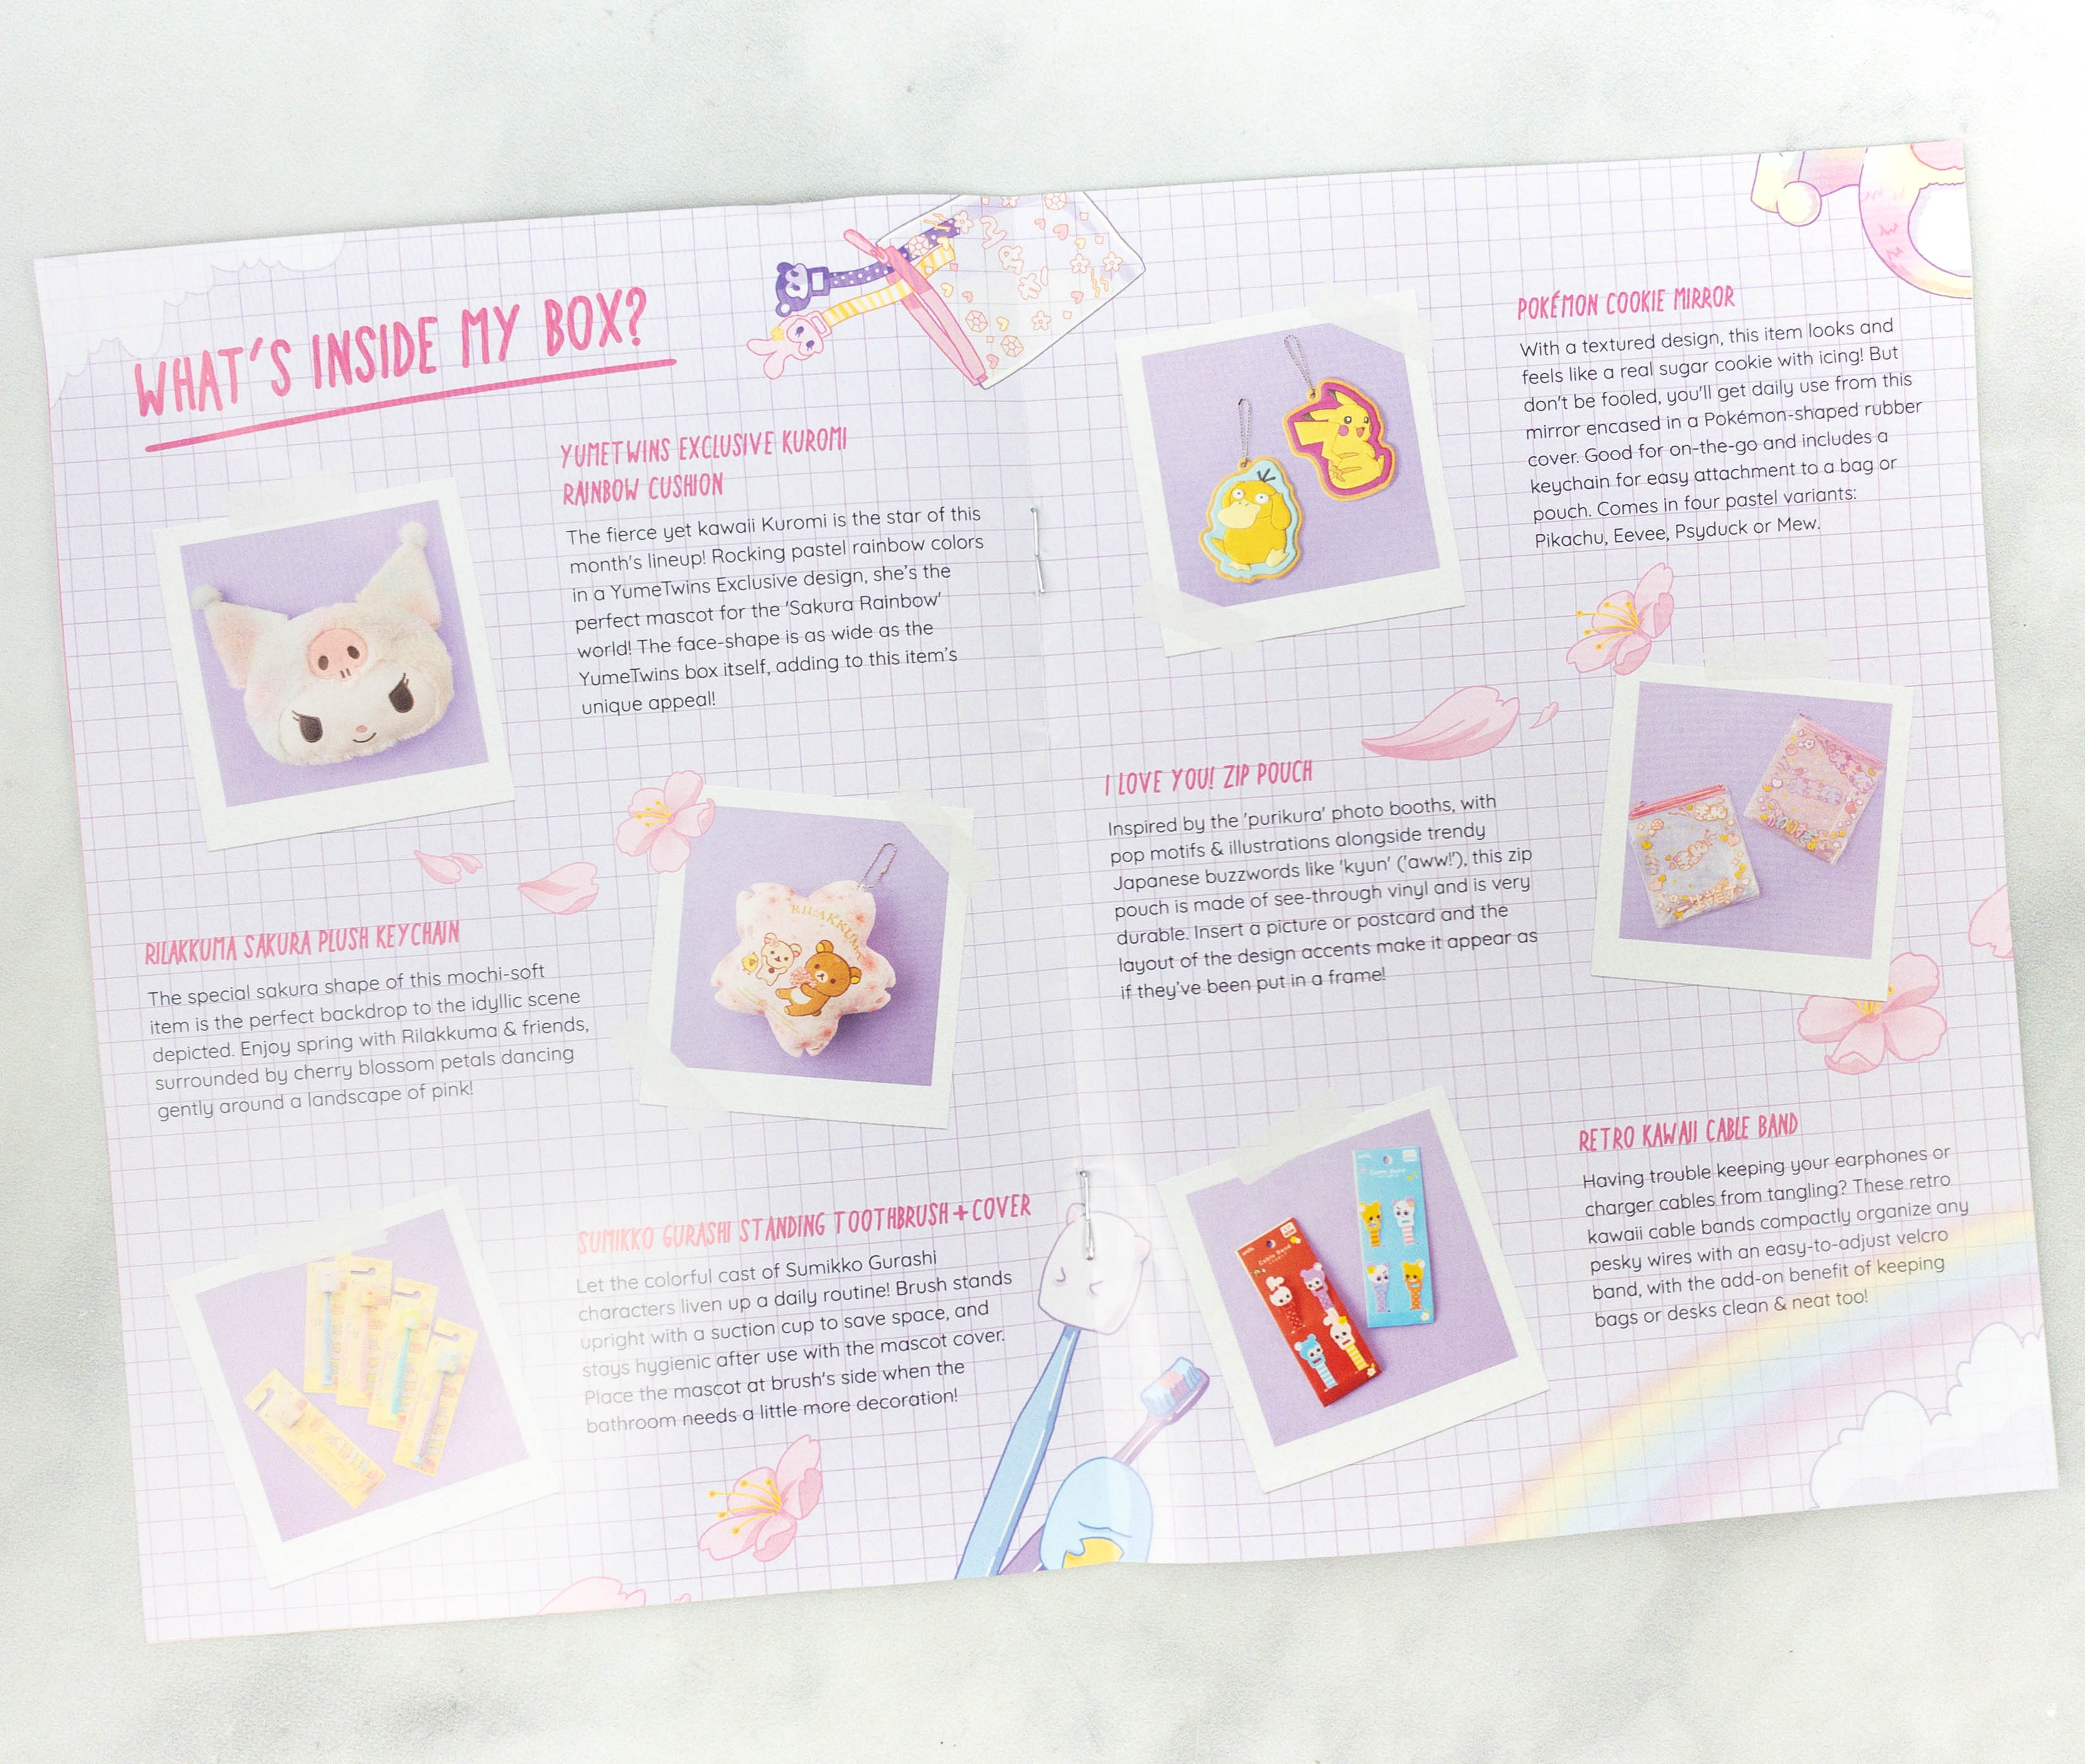 8 Facts you didn't know about Kuromi - YumeTwins: The Monthly Kawaii  Subscription Box Straight from Tokyo to Your Door!